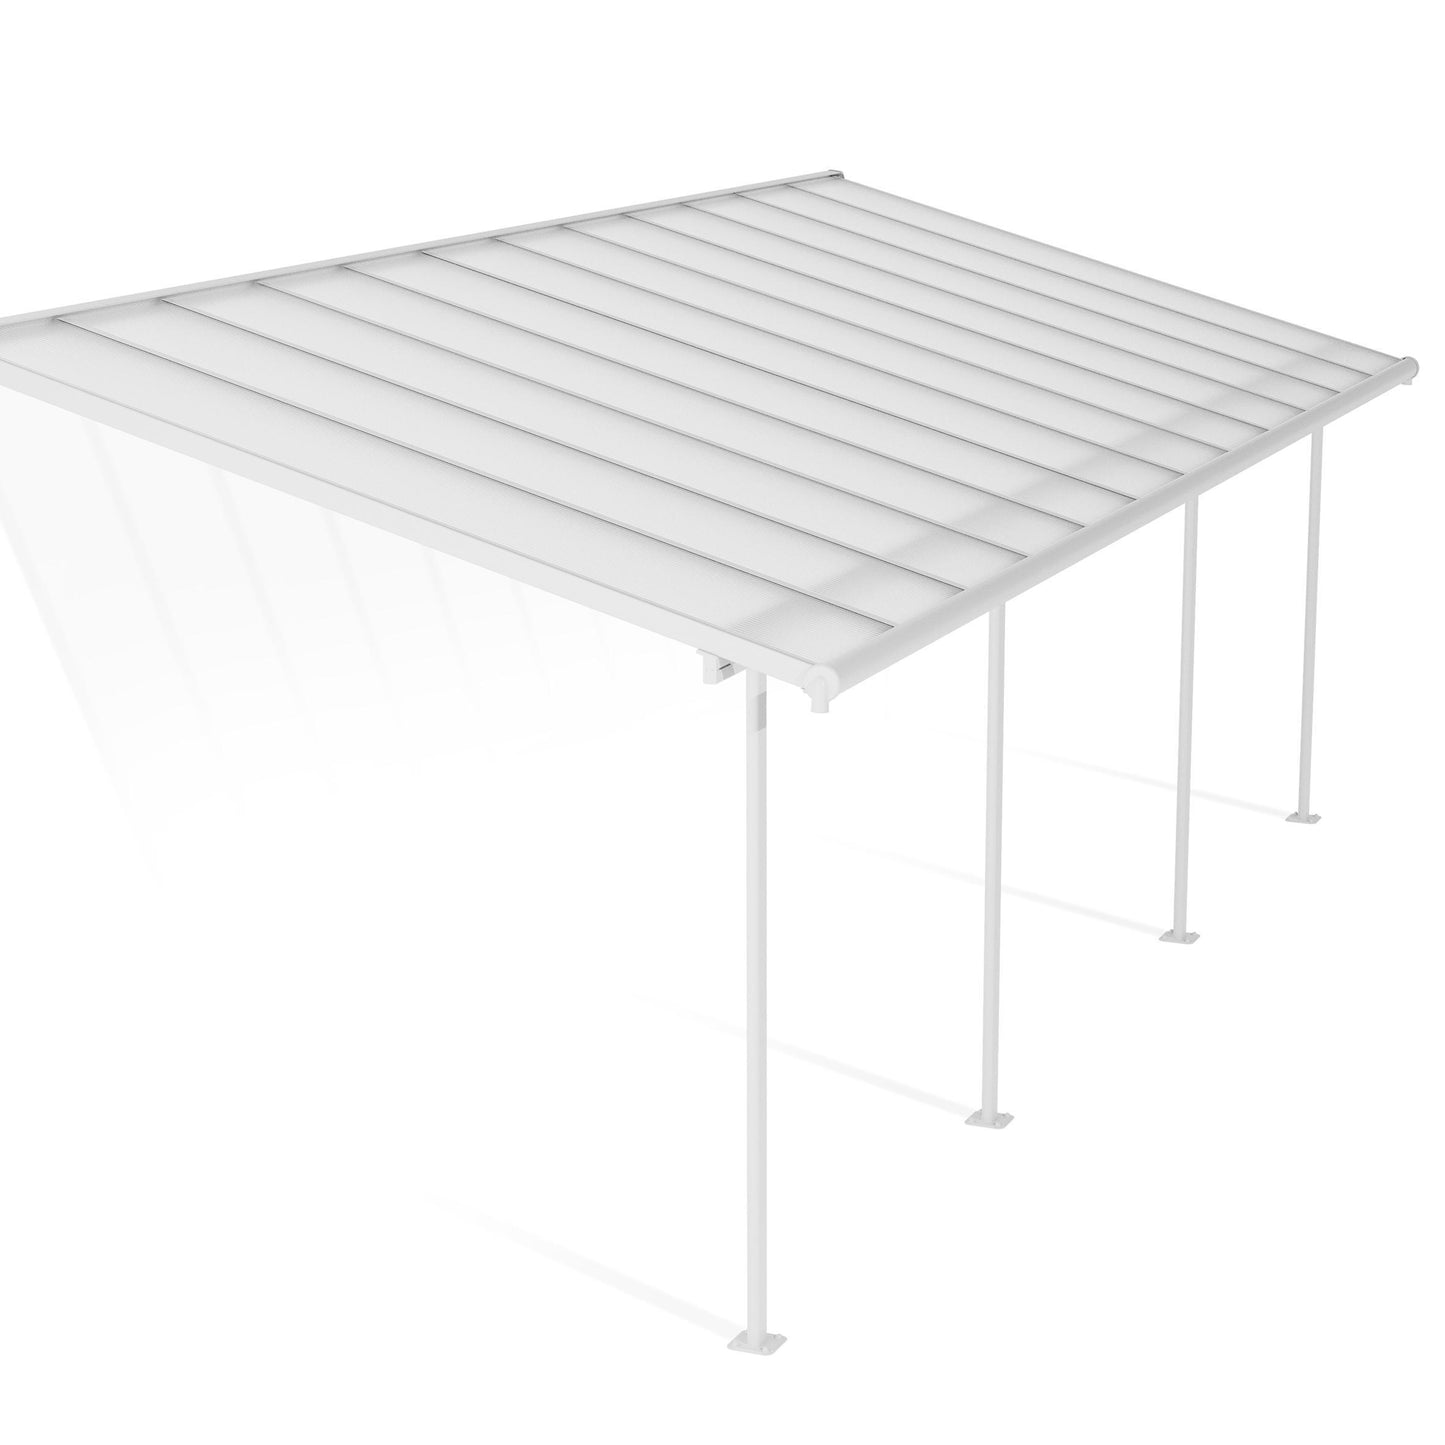 Canopia by Palram 3 x 7.30 Sierra Patio Cover - White